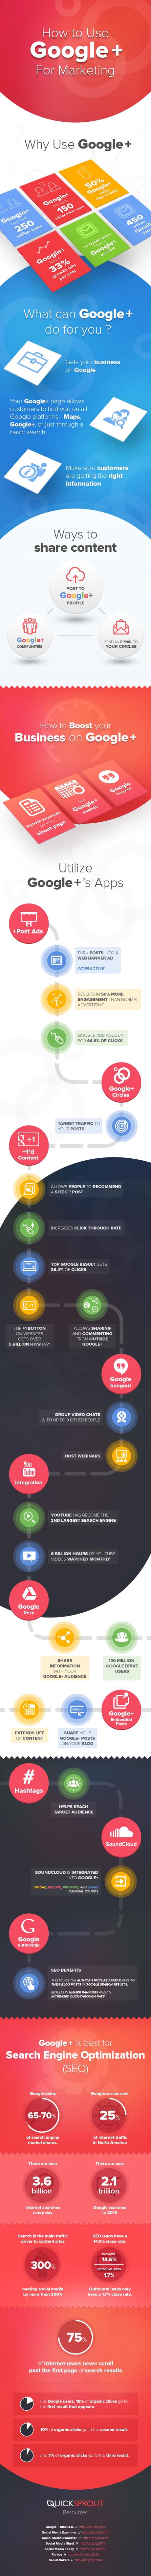 How to Use Google Plus for Marketing